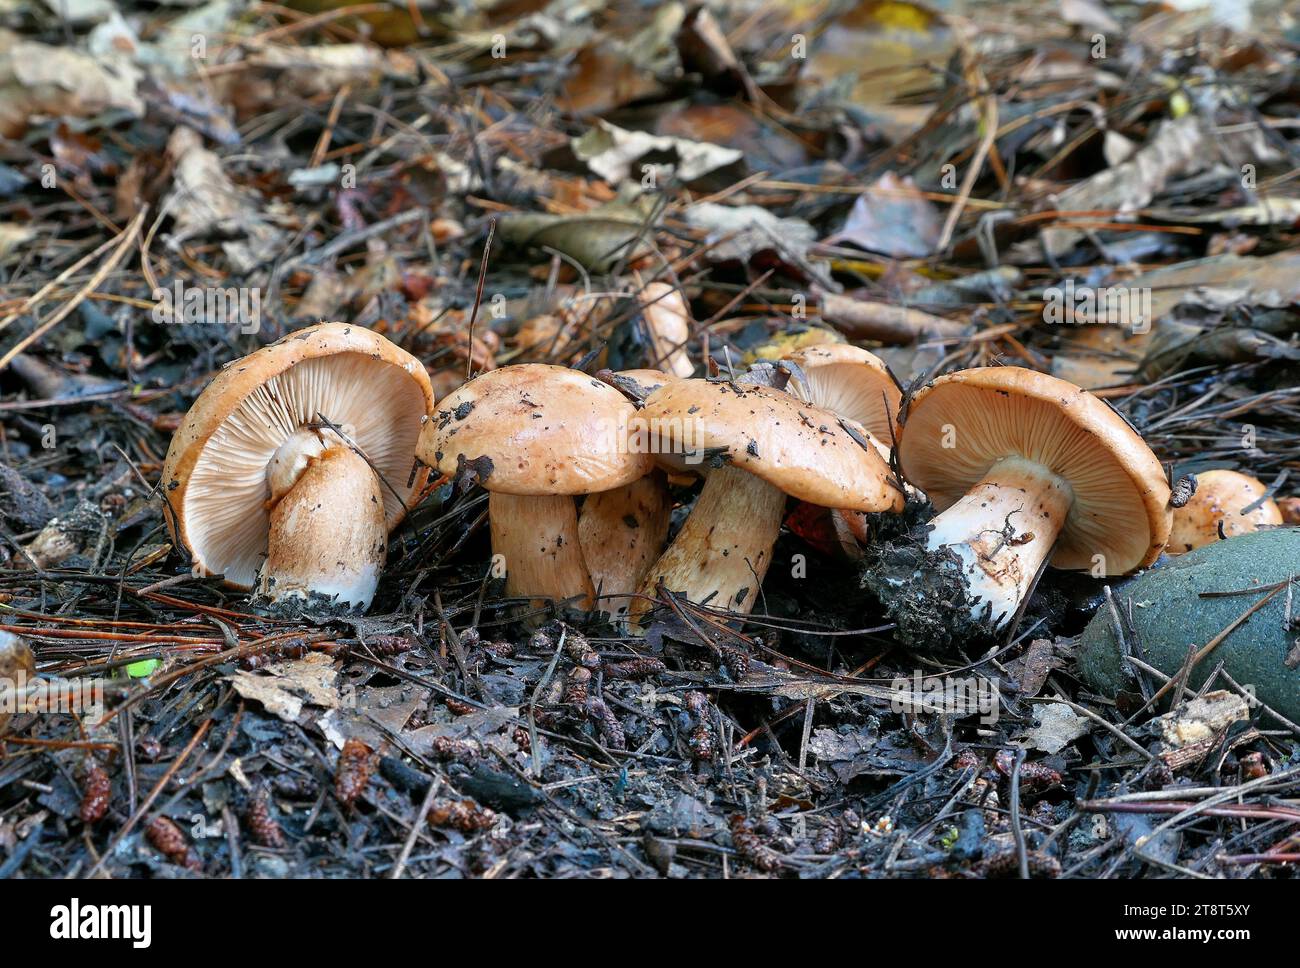 Hebeloma sp, Hebeloma is a genus of fungi in the family Hymenogastraceae. Found worldwide, it contains the poison pie or fairy cakes and the ghoul fungus, from Western Australia, which grows on rotting animal remains Stock Photo